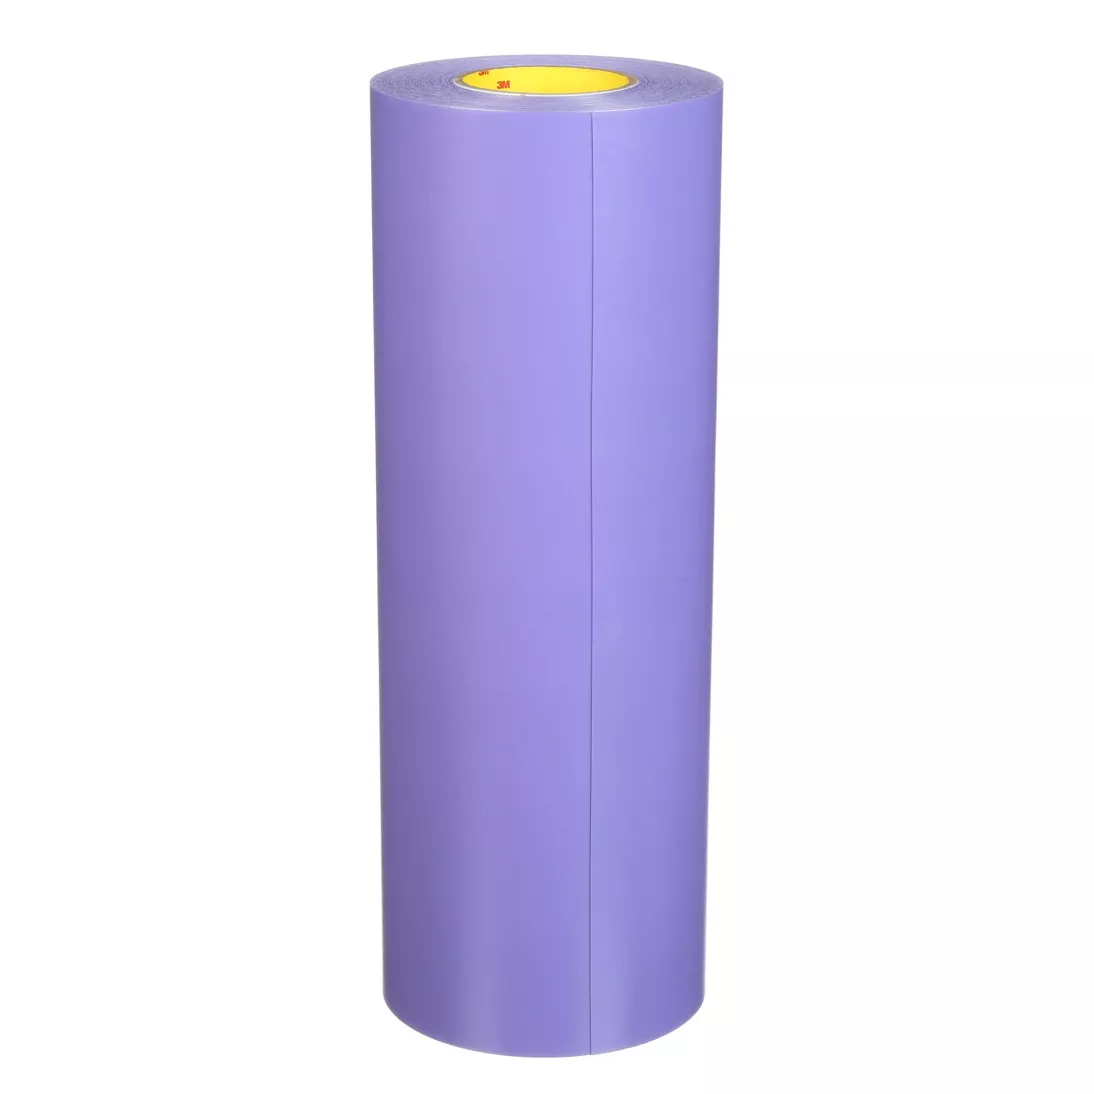 3M™ Cushion-Mount™ Plus Plate Mounting Tape E1515, Purple, 18 in x 25
yd, 15 mil, 1 roll per case